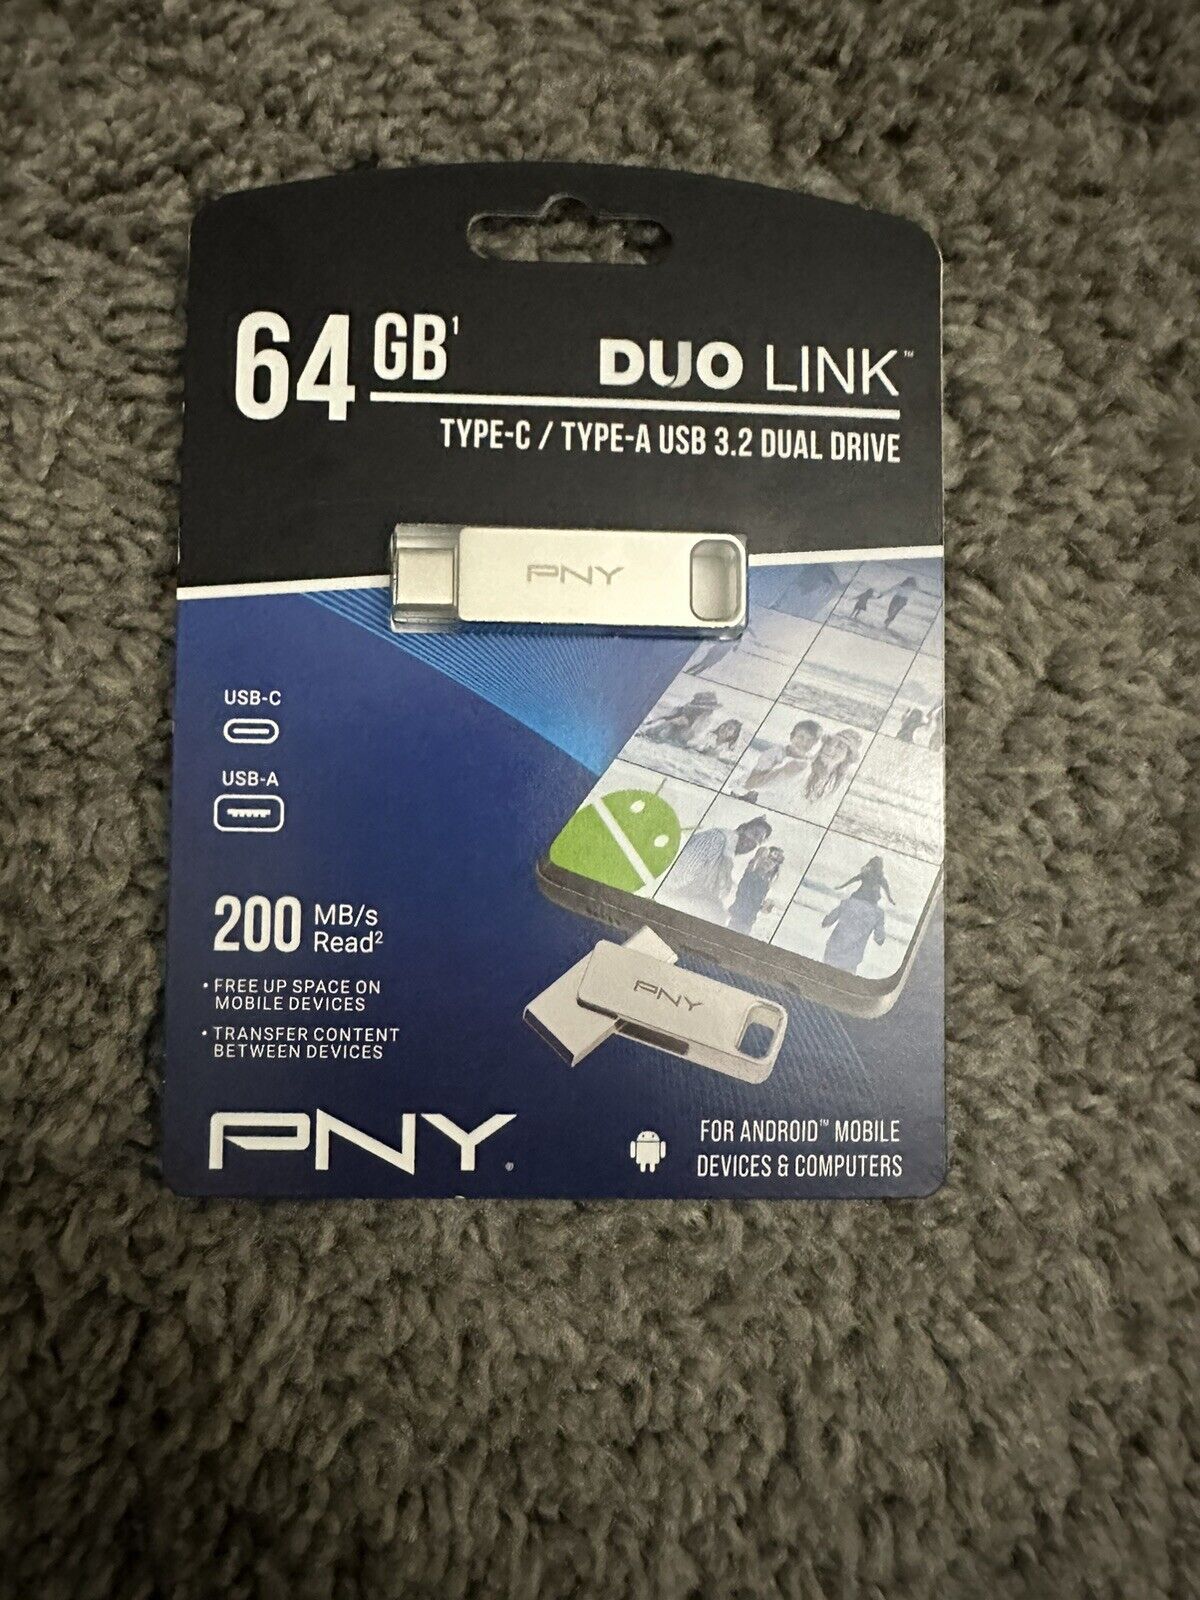 PNY 64GB Duo Link USB 3.2 Dual Flash Drive Type-C & Type-A NEW Sealed -fast ship